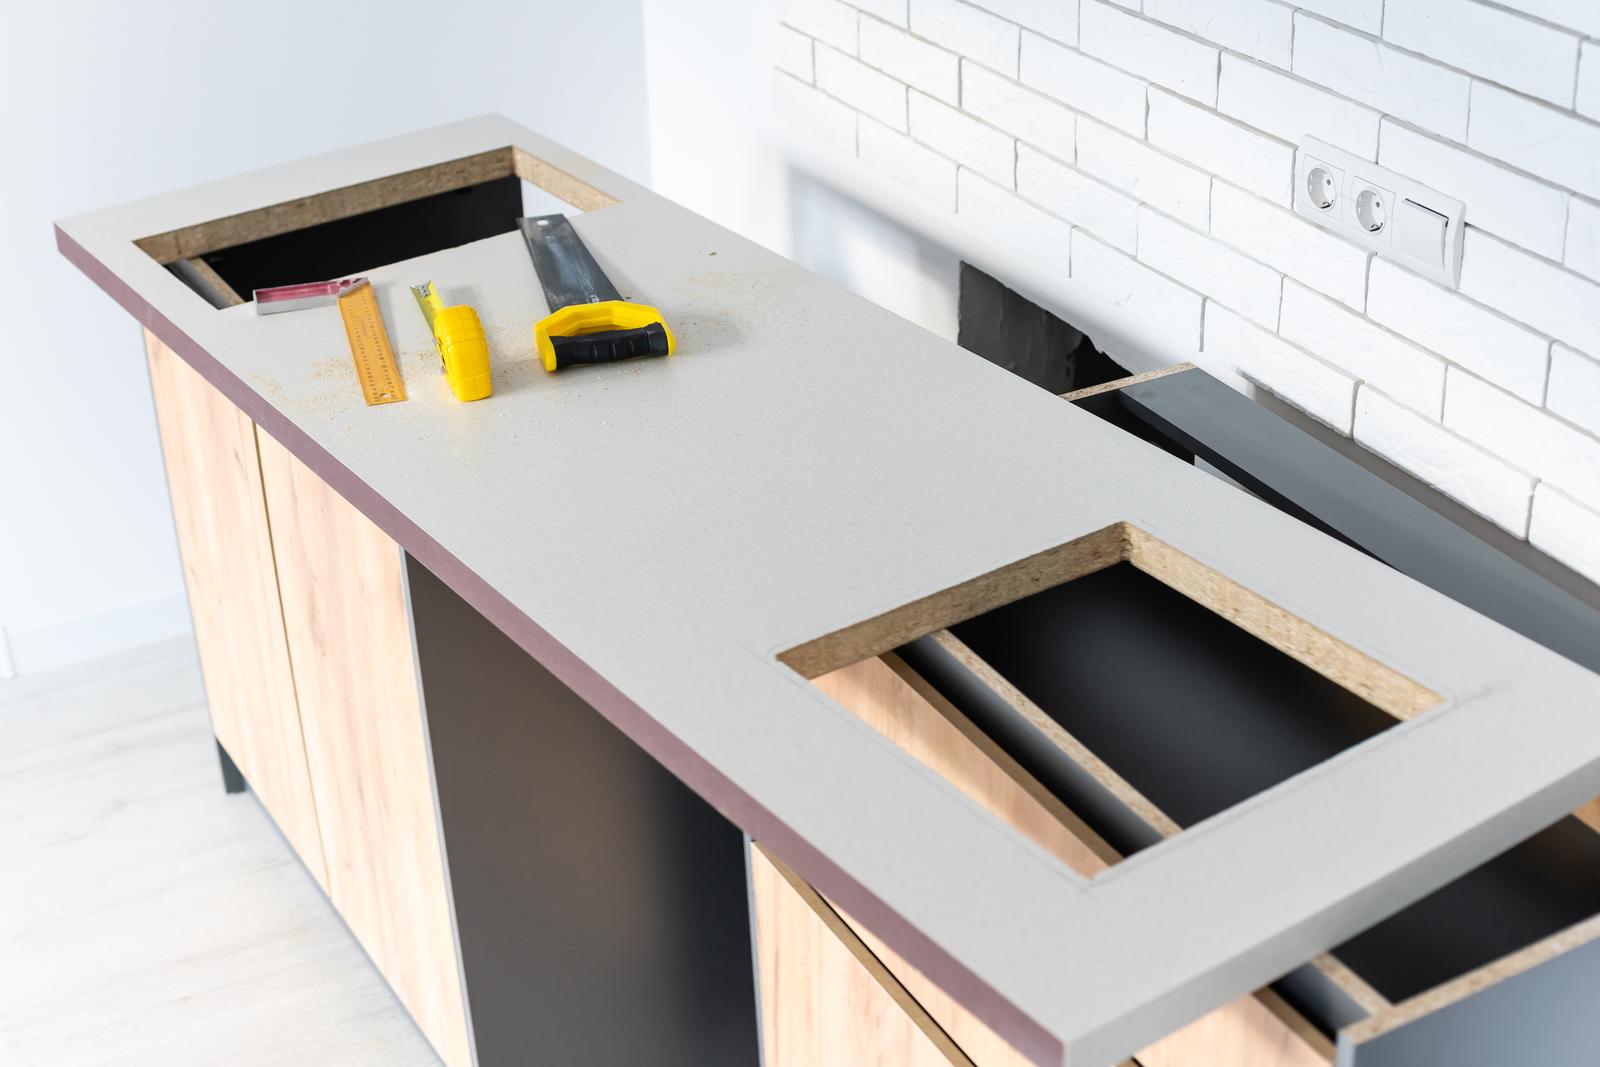 How To Install Home Depot Countertops Will Home Depot Cut Countertops for You? - AisleofShame.com